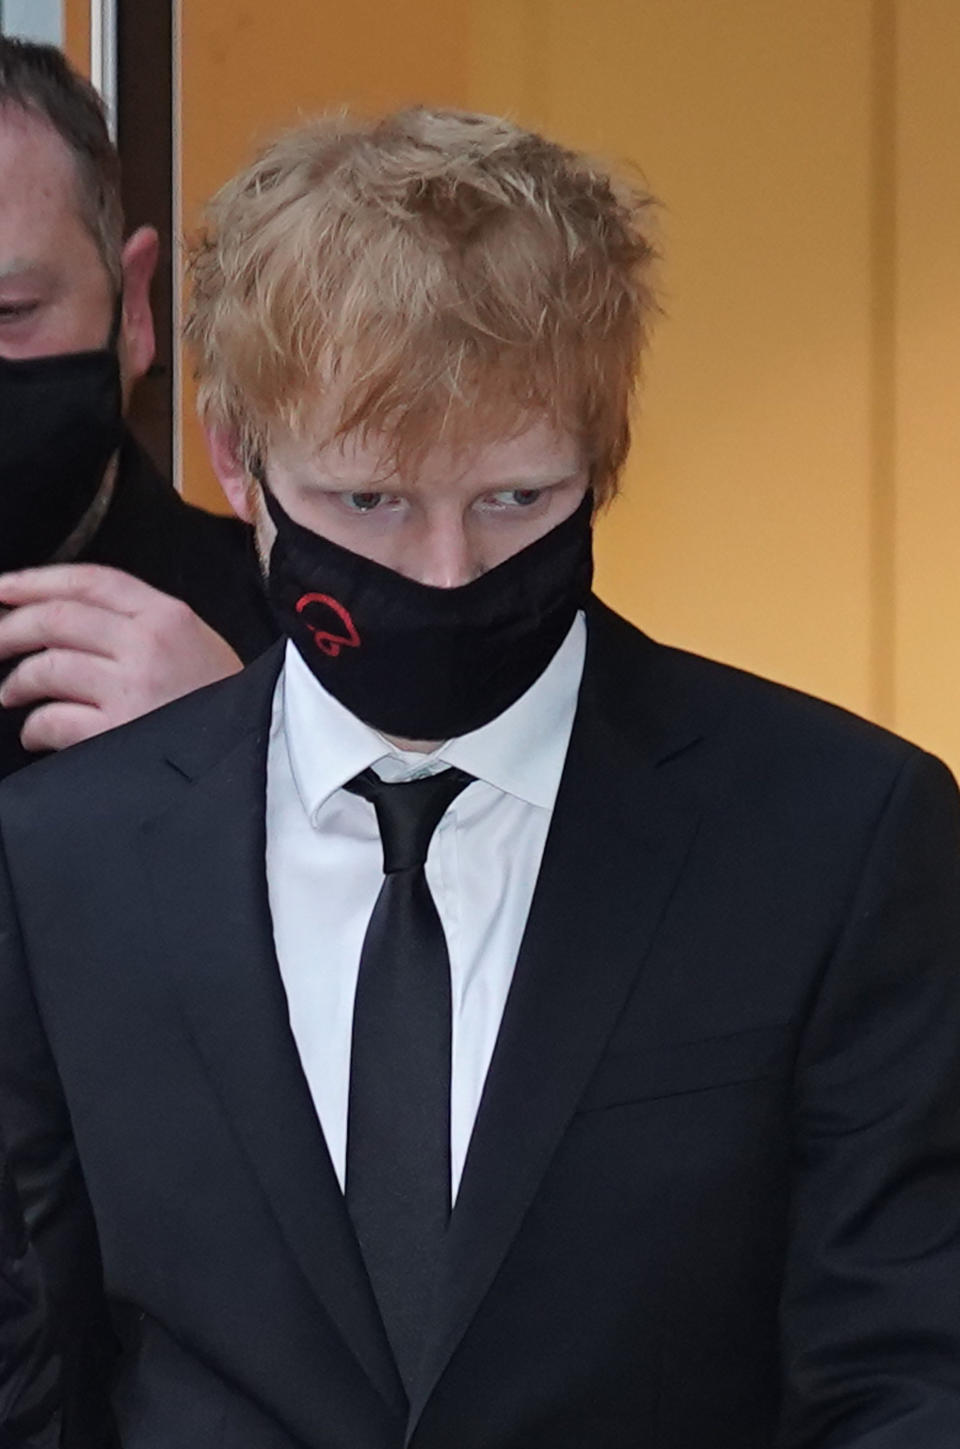 Ed Sheeran leaves the Rolls Building in central London, where he has brought legal action over his 2017 hit song 'Shape of You' after song writers Sami Chokri and Ross O'Donoghue claimed the song infringes parts of one of their songs. Picture date: Friday March 4, 2022.